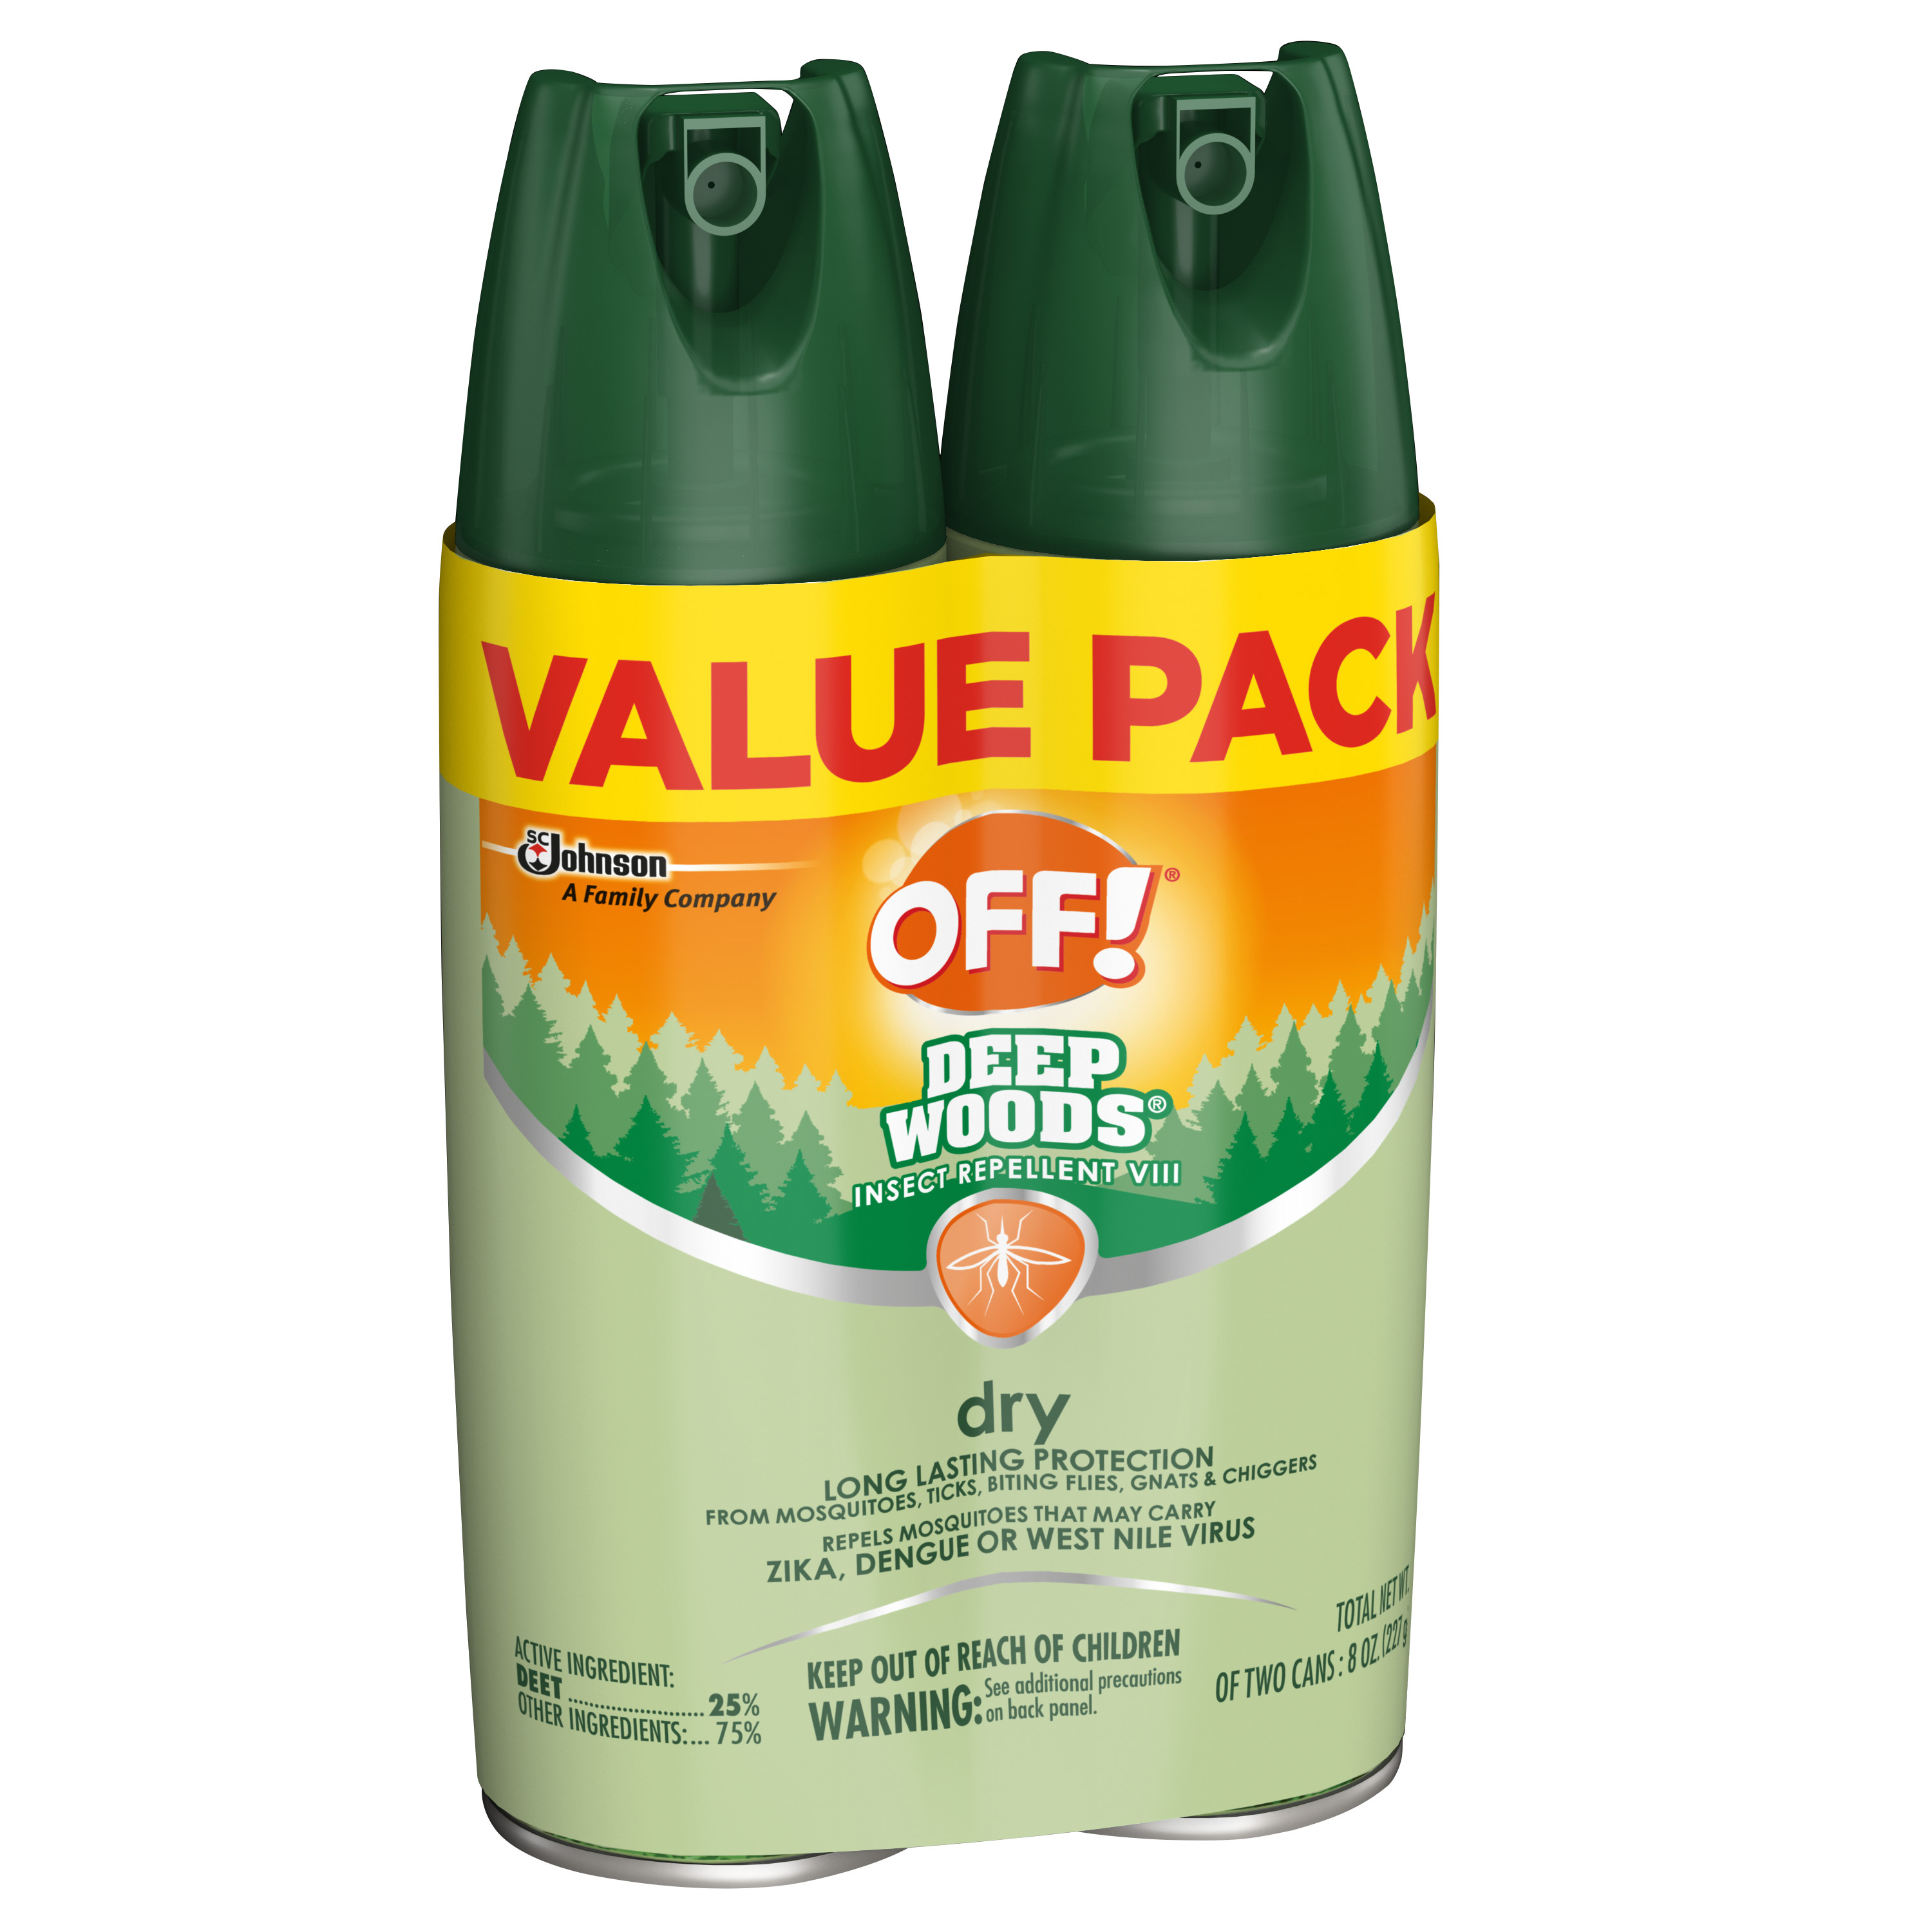 OFF! Deep Woods Non-Greasy Mosquito Repellent Dry Bug Spray with DEET, 4 oz, 2 Count - image 15 of 16